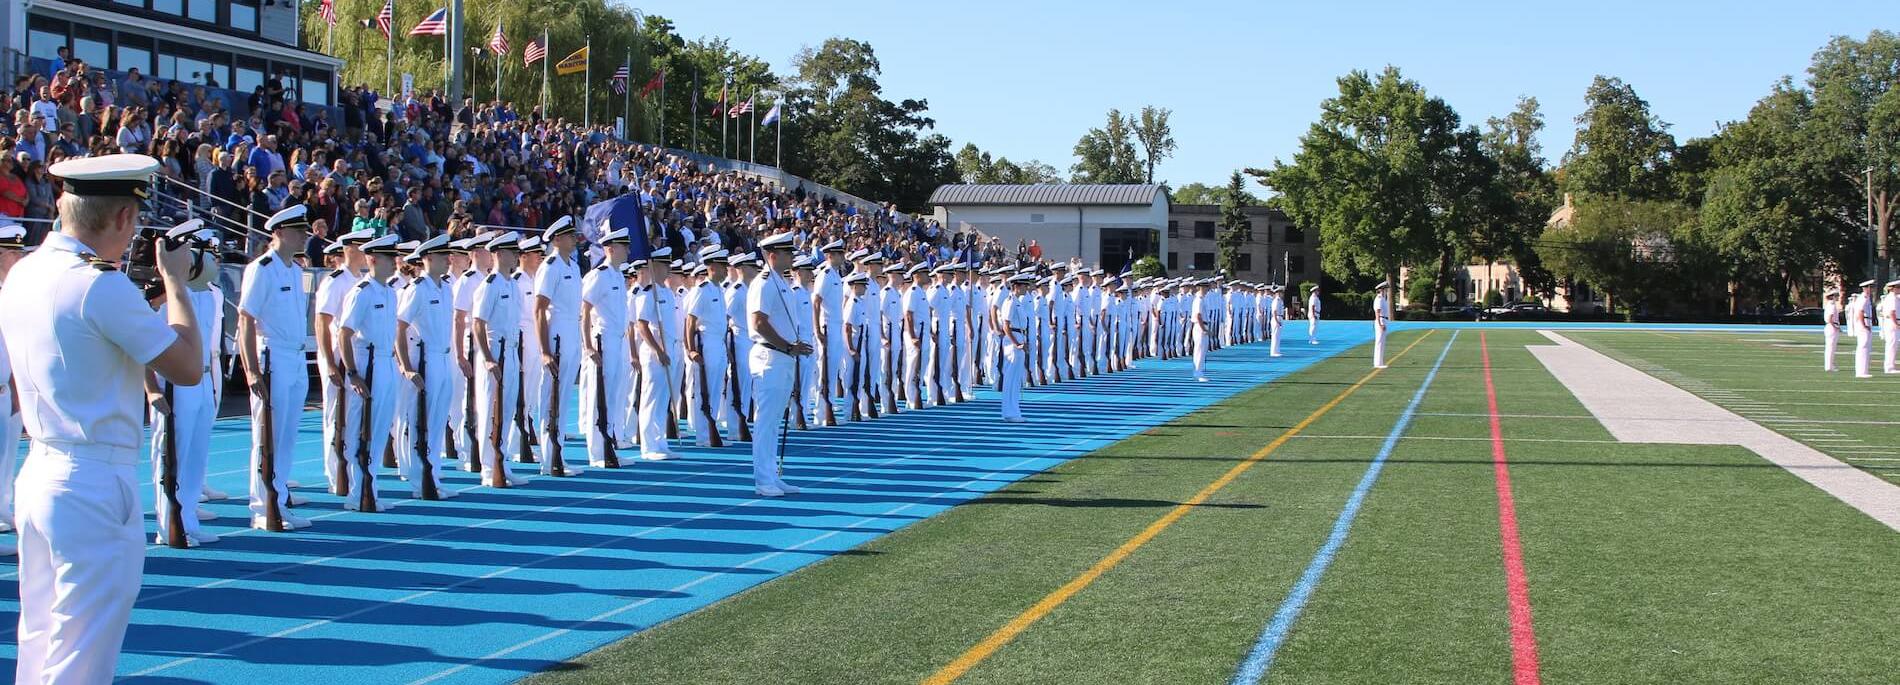 Cadets standing in formation